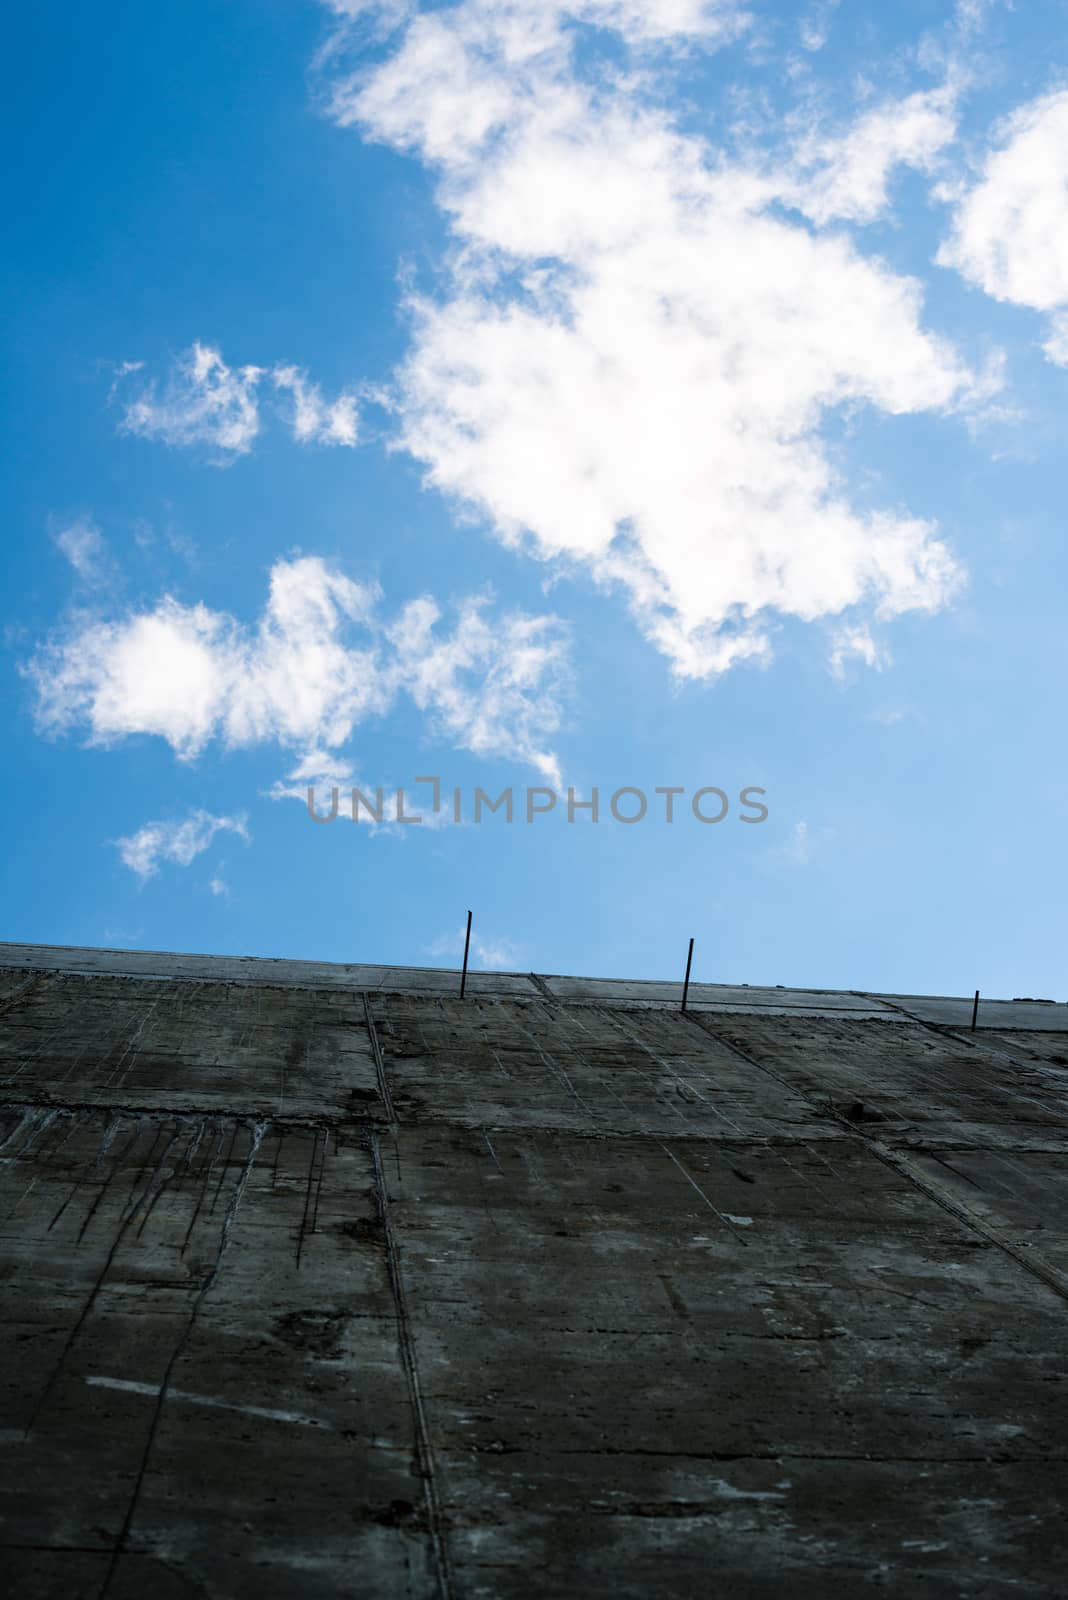 Gray concrete wall against the blue sky with white clouds.